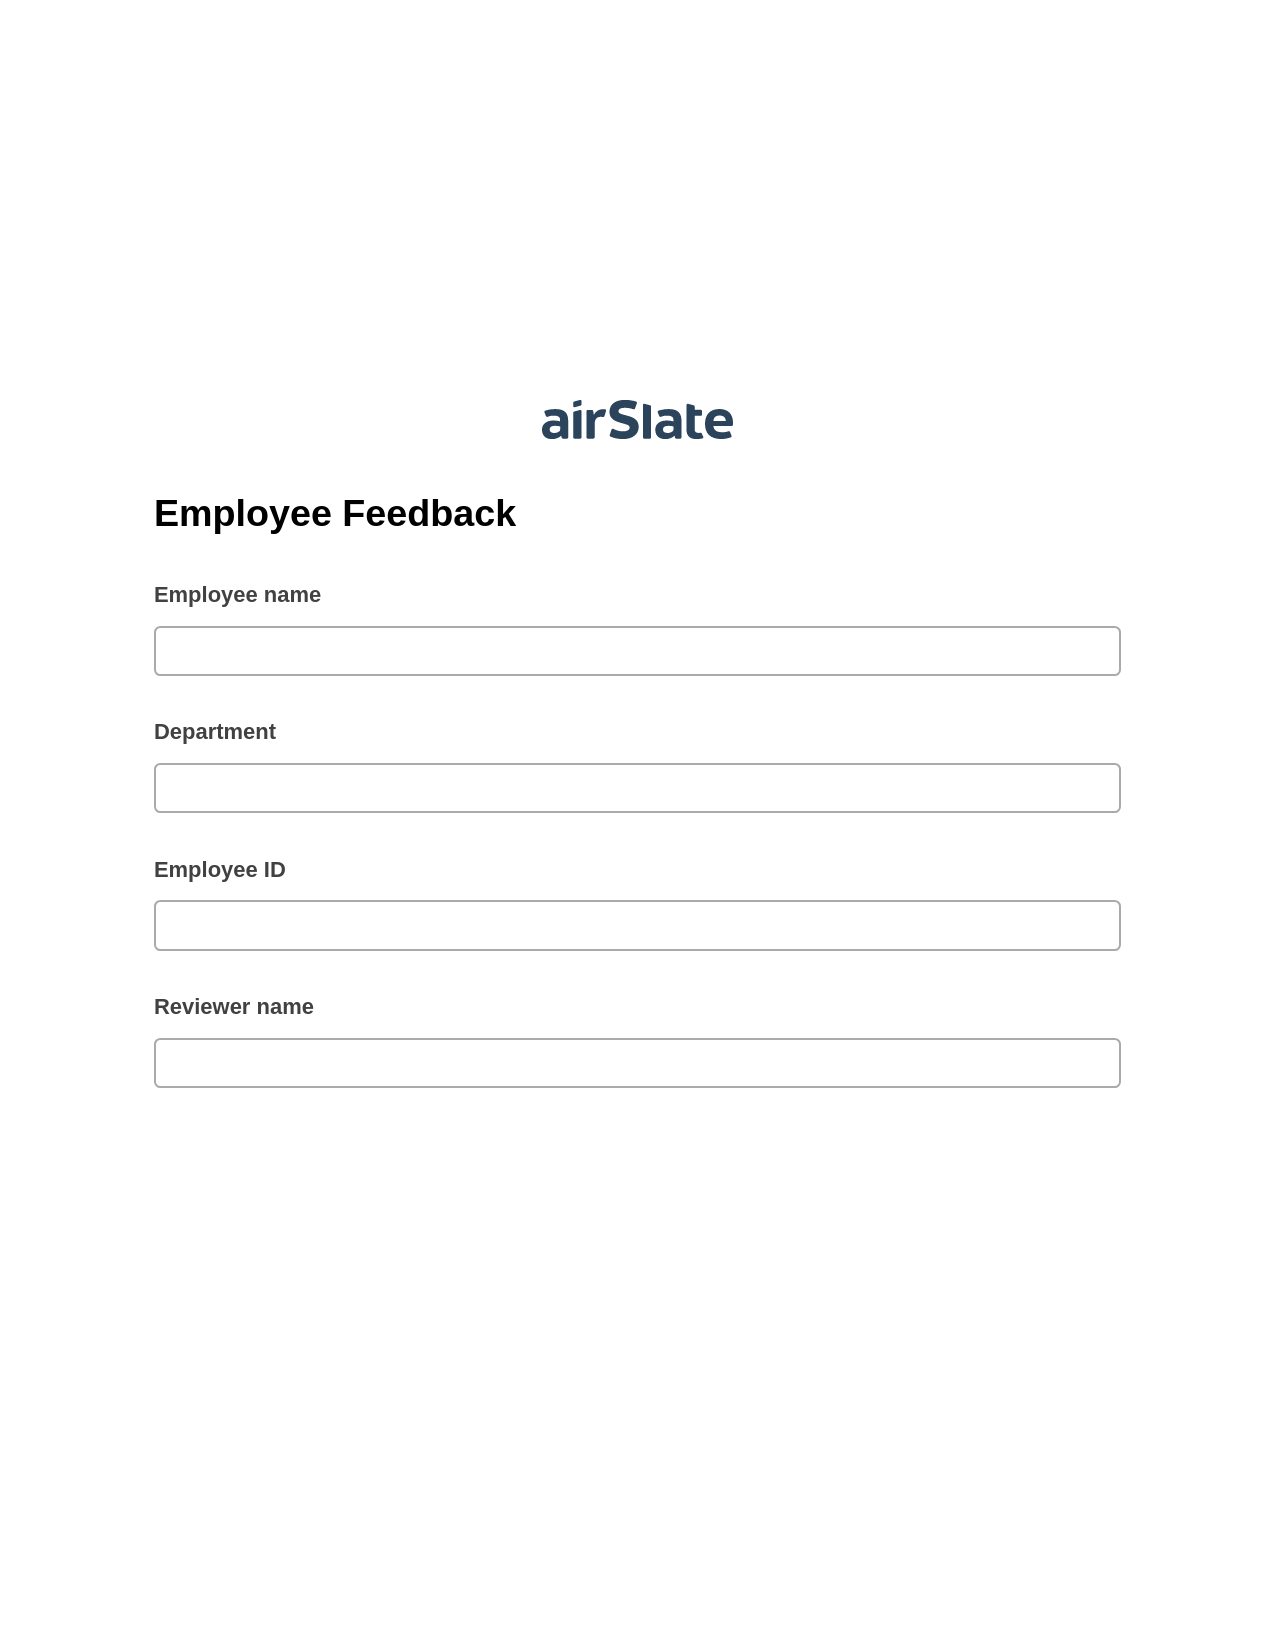 Multirole Employee Feedback Pre-fill from NetSuite Records Bot, Mailchimp send Campaign bot, Export to Google Sheet Bot